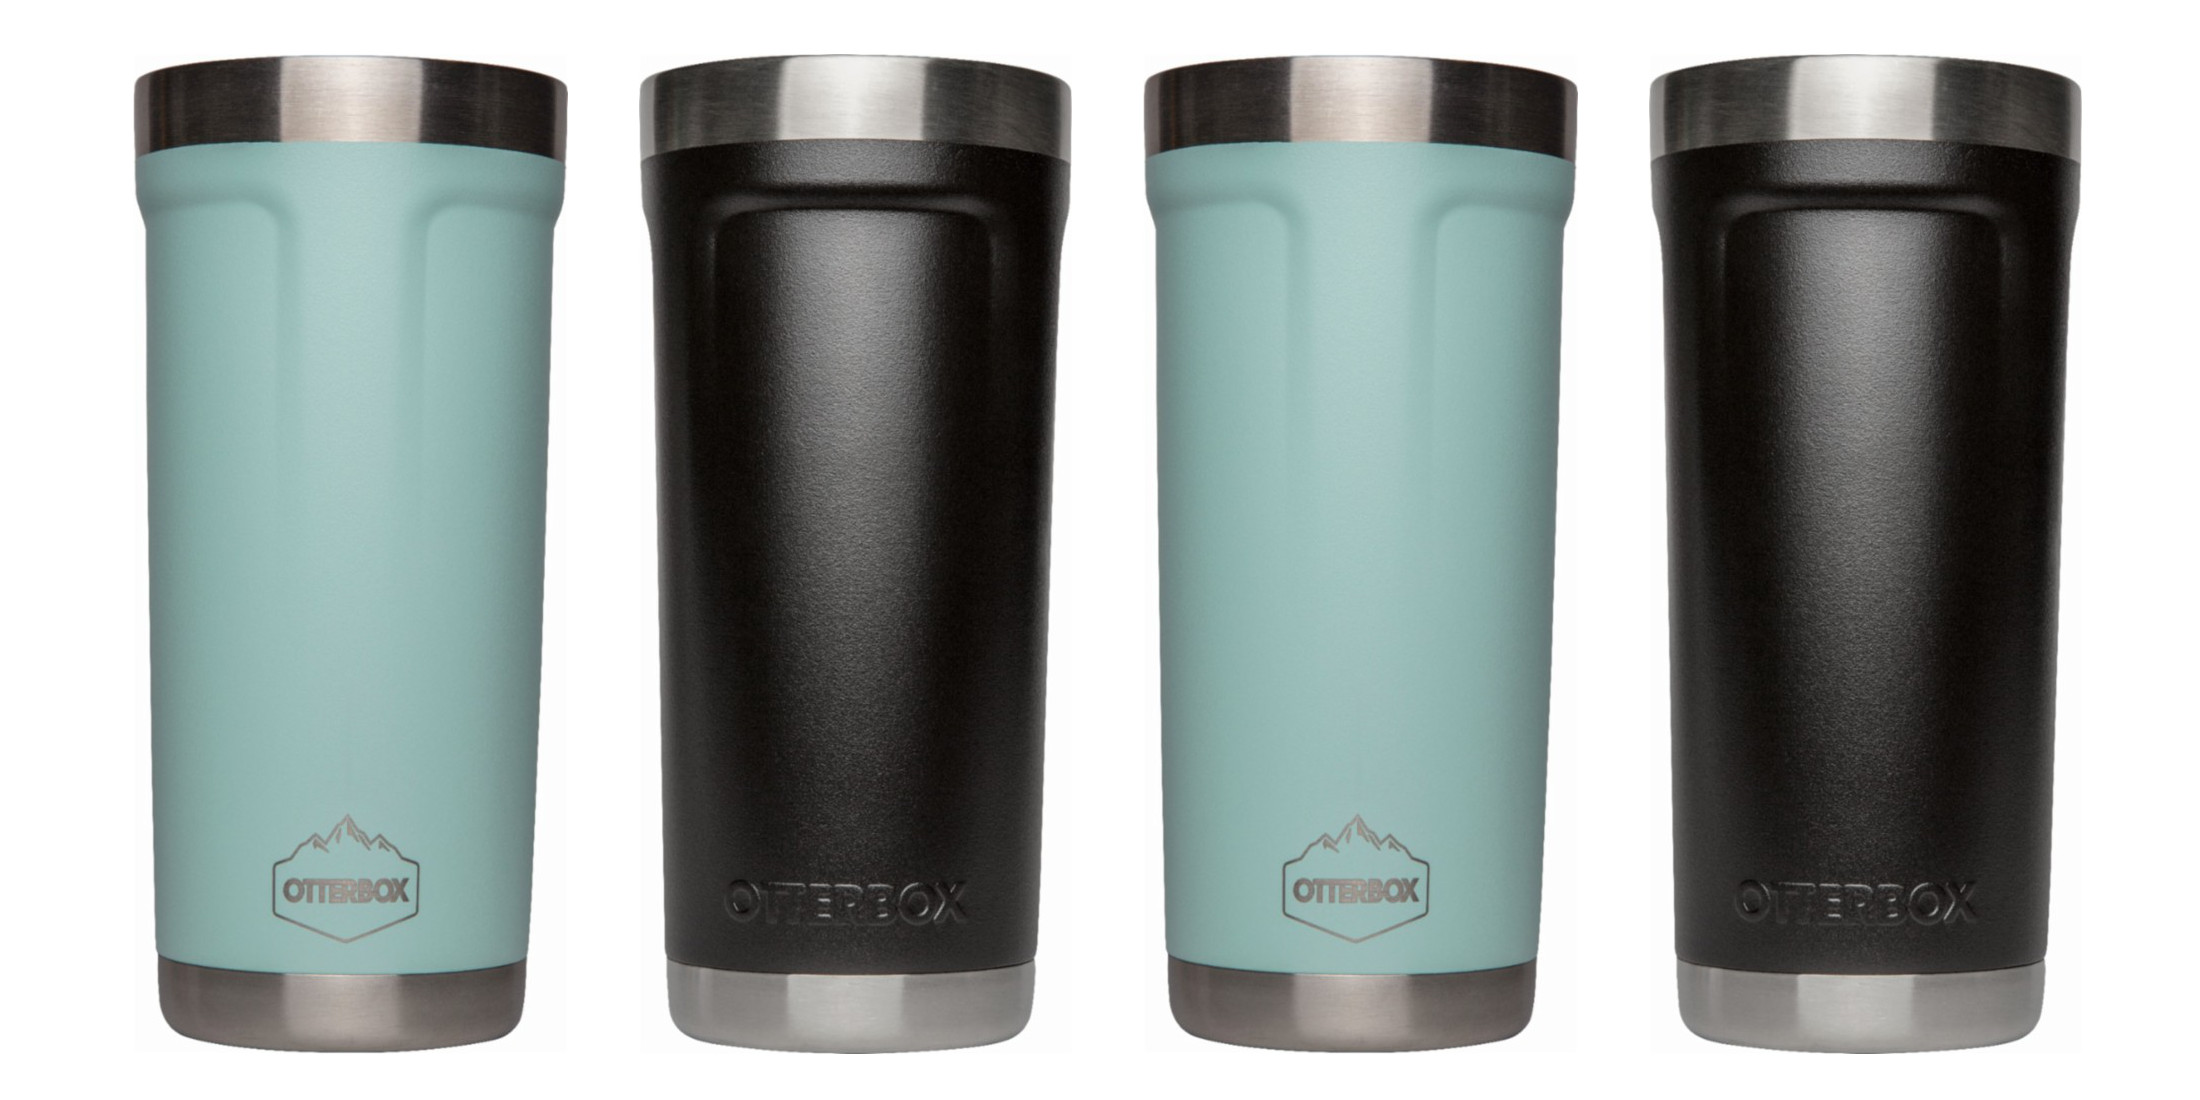 OTTERBOX ELEVATION 20 ~Blue~ Stainless Steel 20oz Tumbler